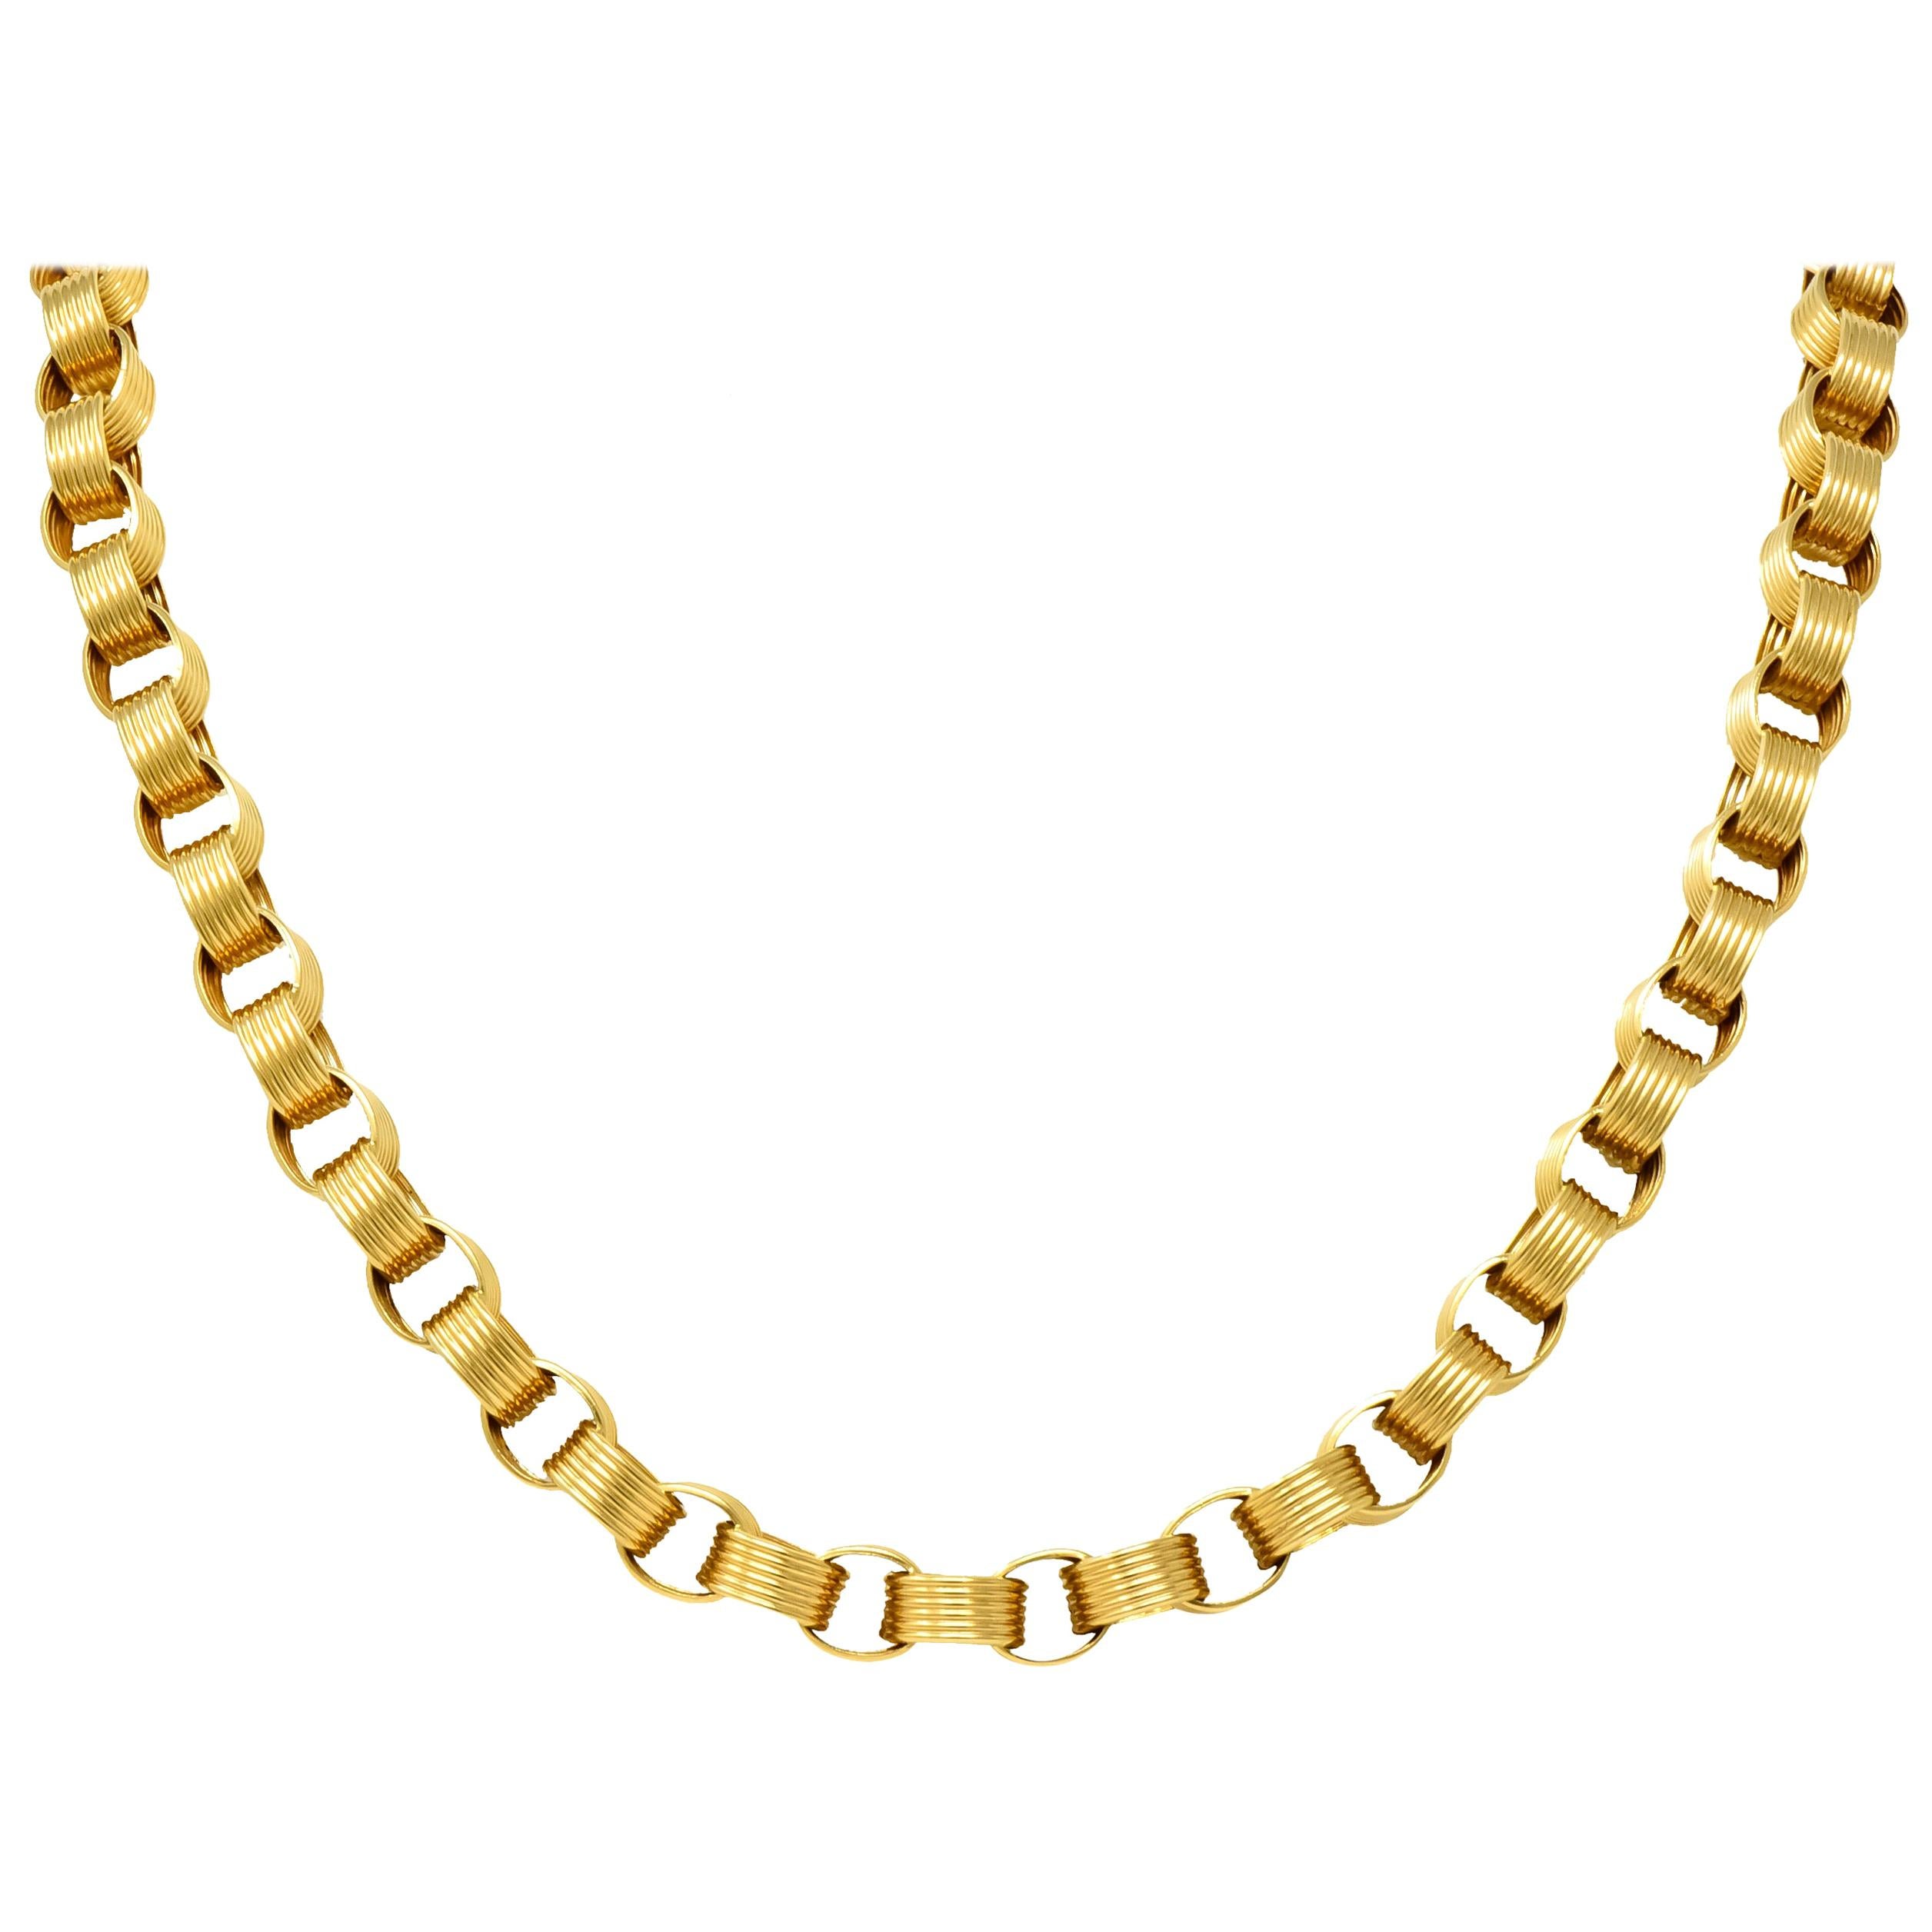 Vintage 1960s 18 Karat Yellow Gold Large Linked Rolo Chain Necklace